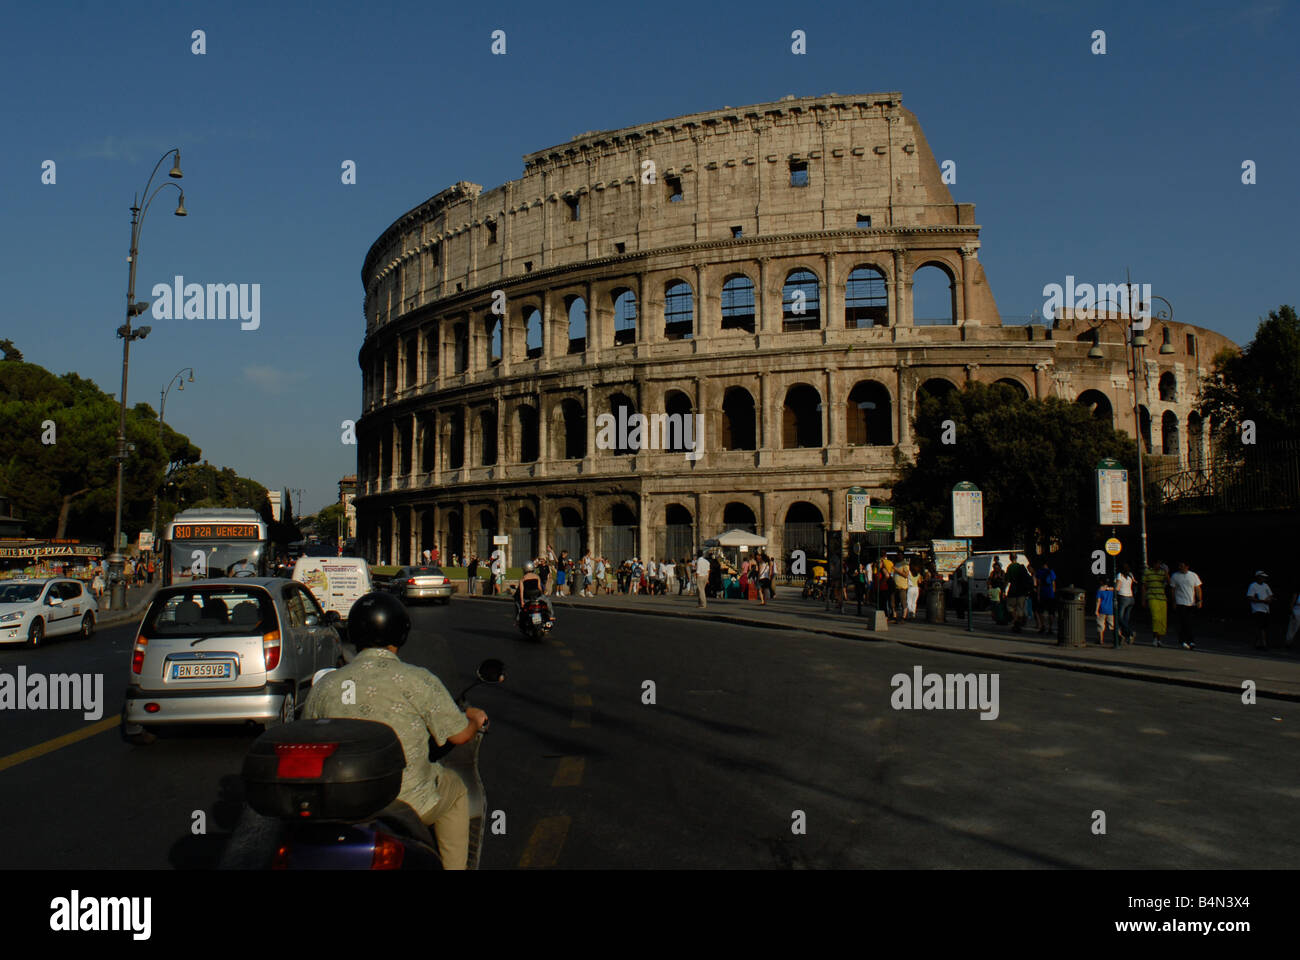 Traffic passing the Colosseum in Rome, Italy Stock Photo